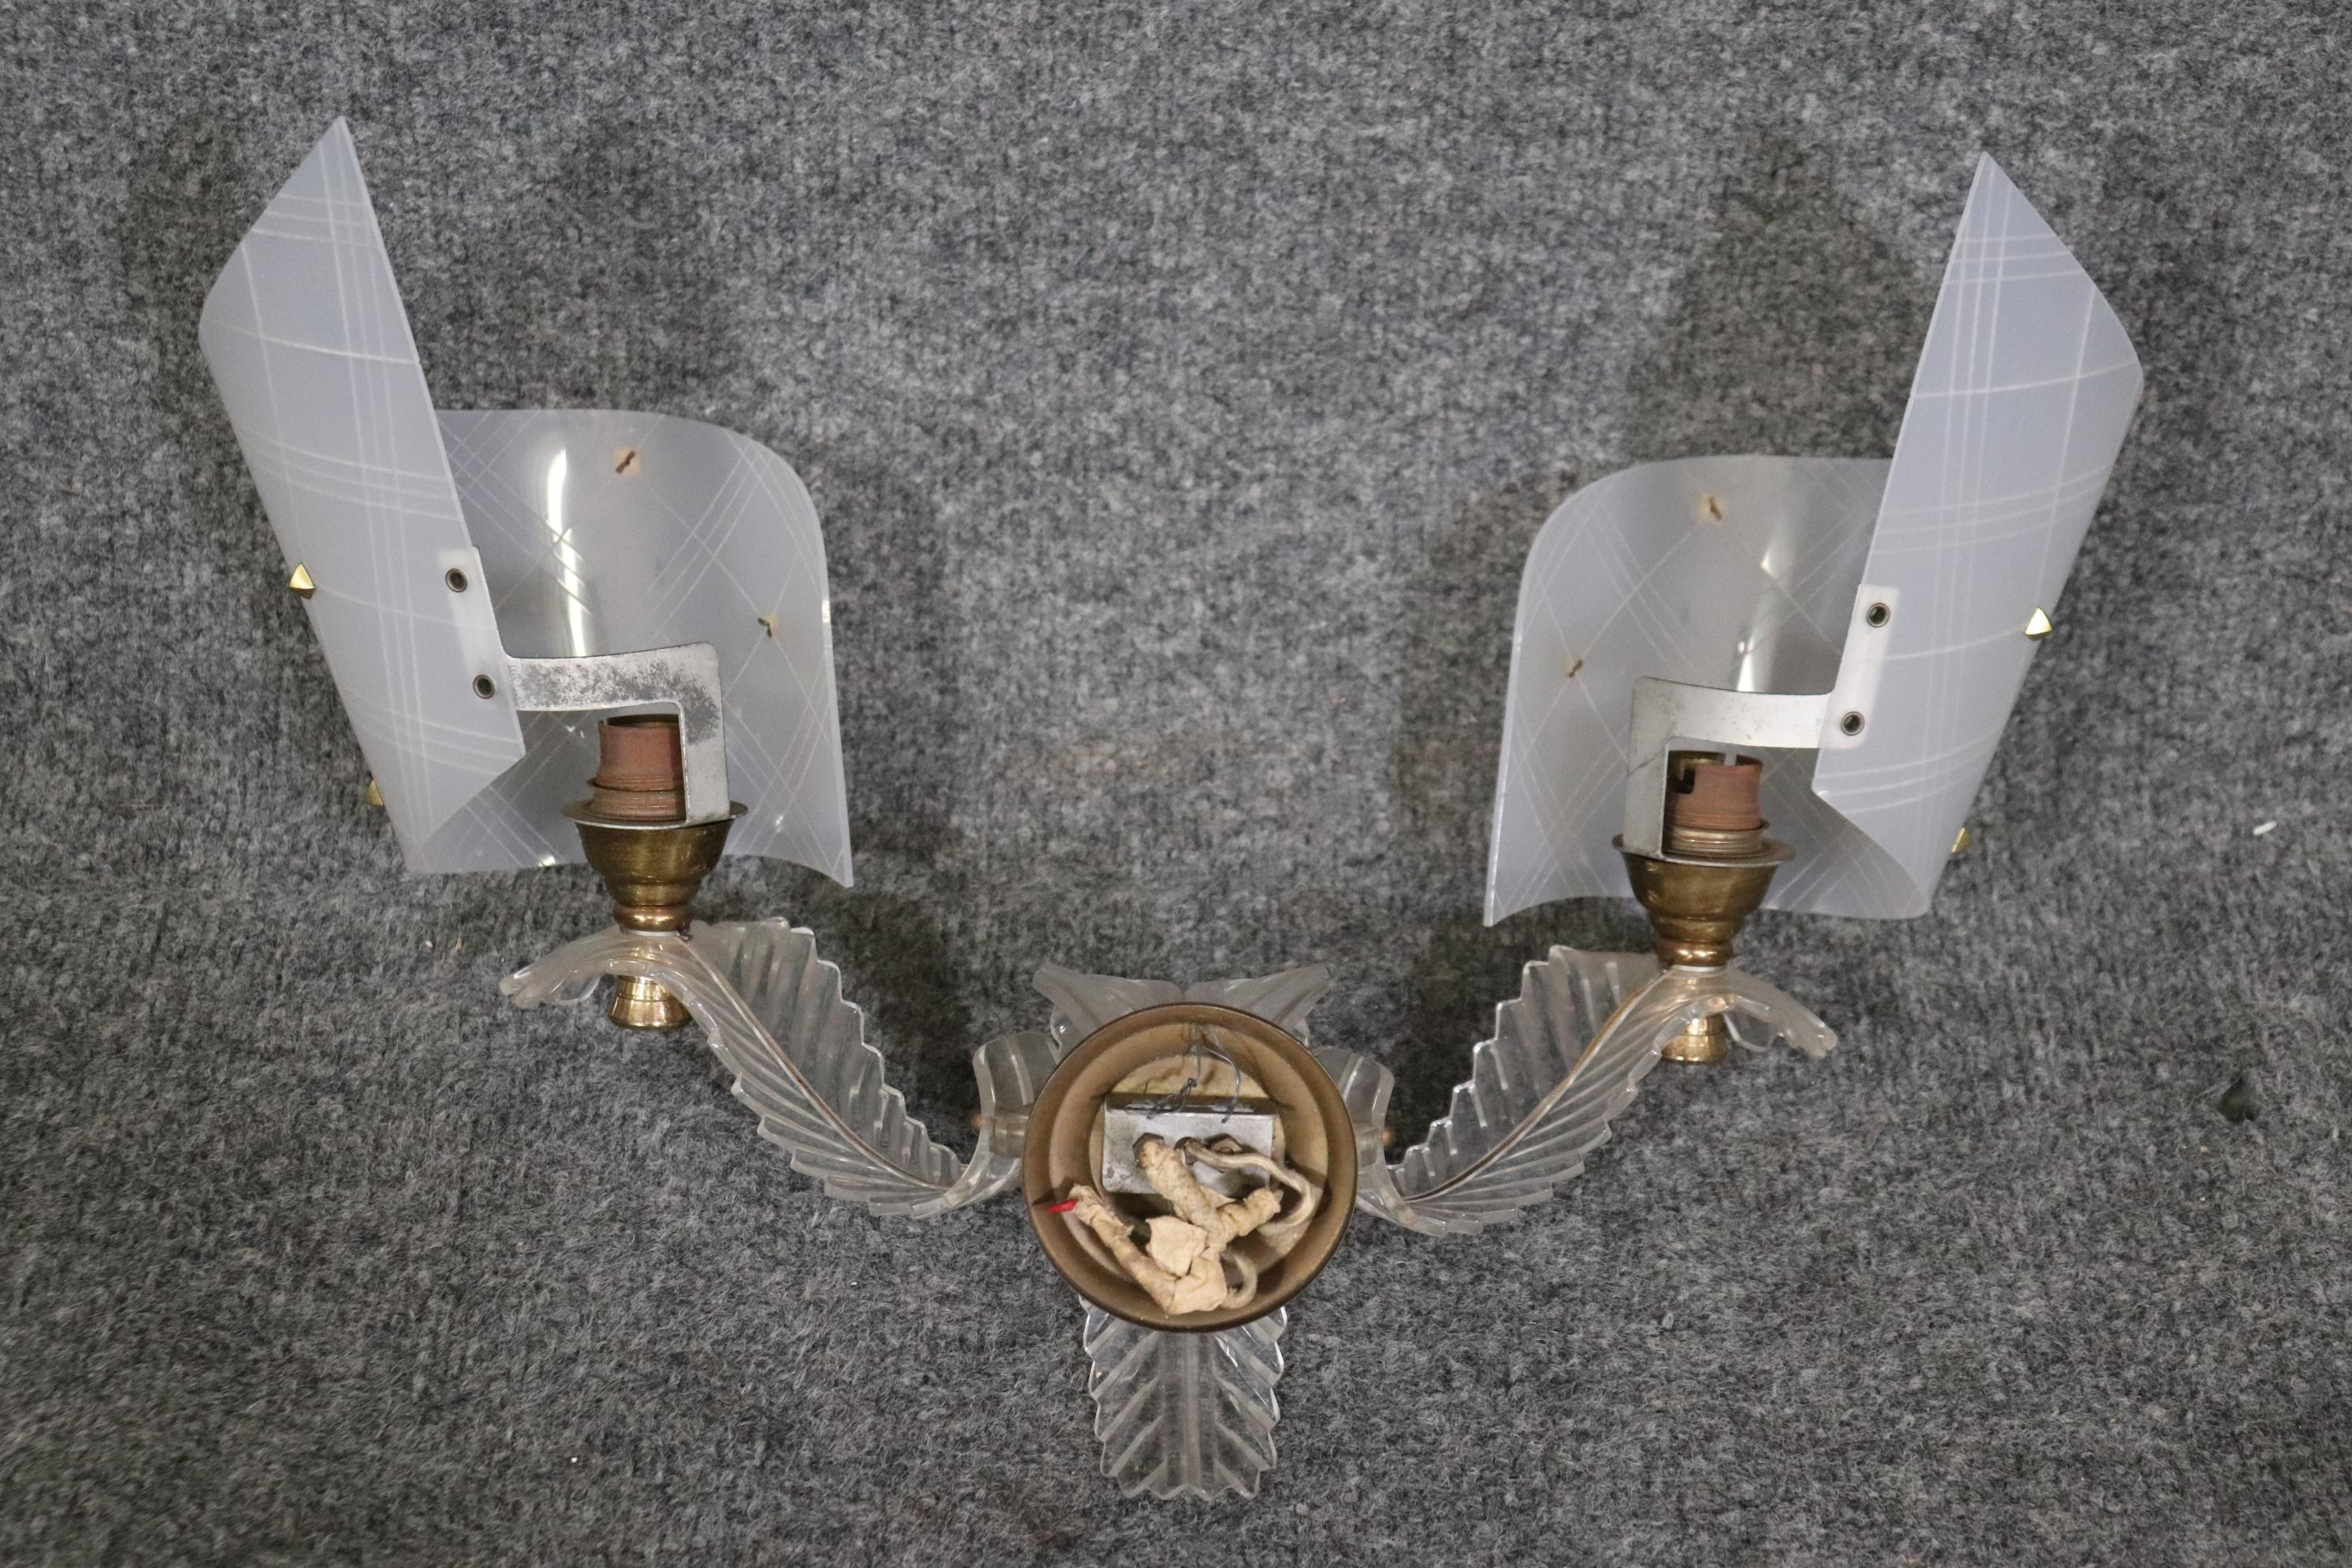 Metalwork Pair of French Art Deco Hollywood Regency Lucite and Brass Wall Sconces C. 1930s